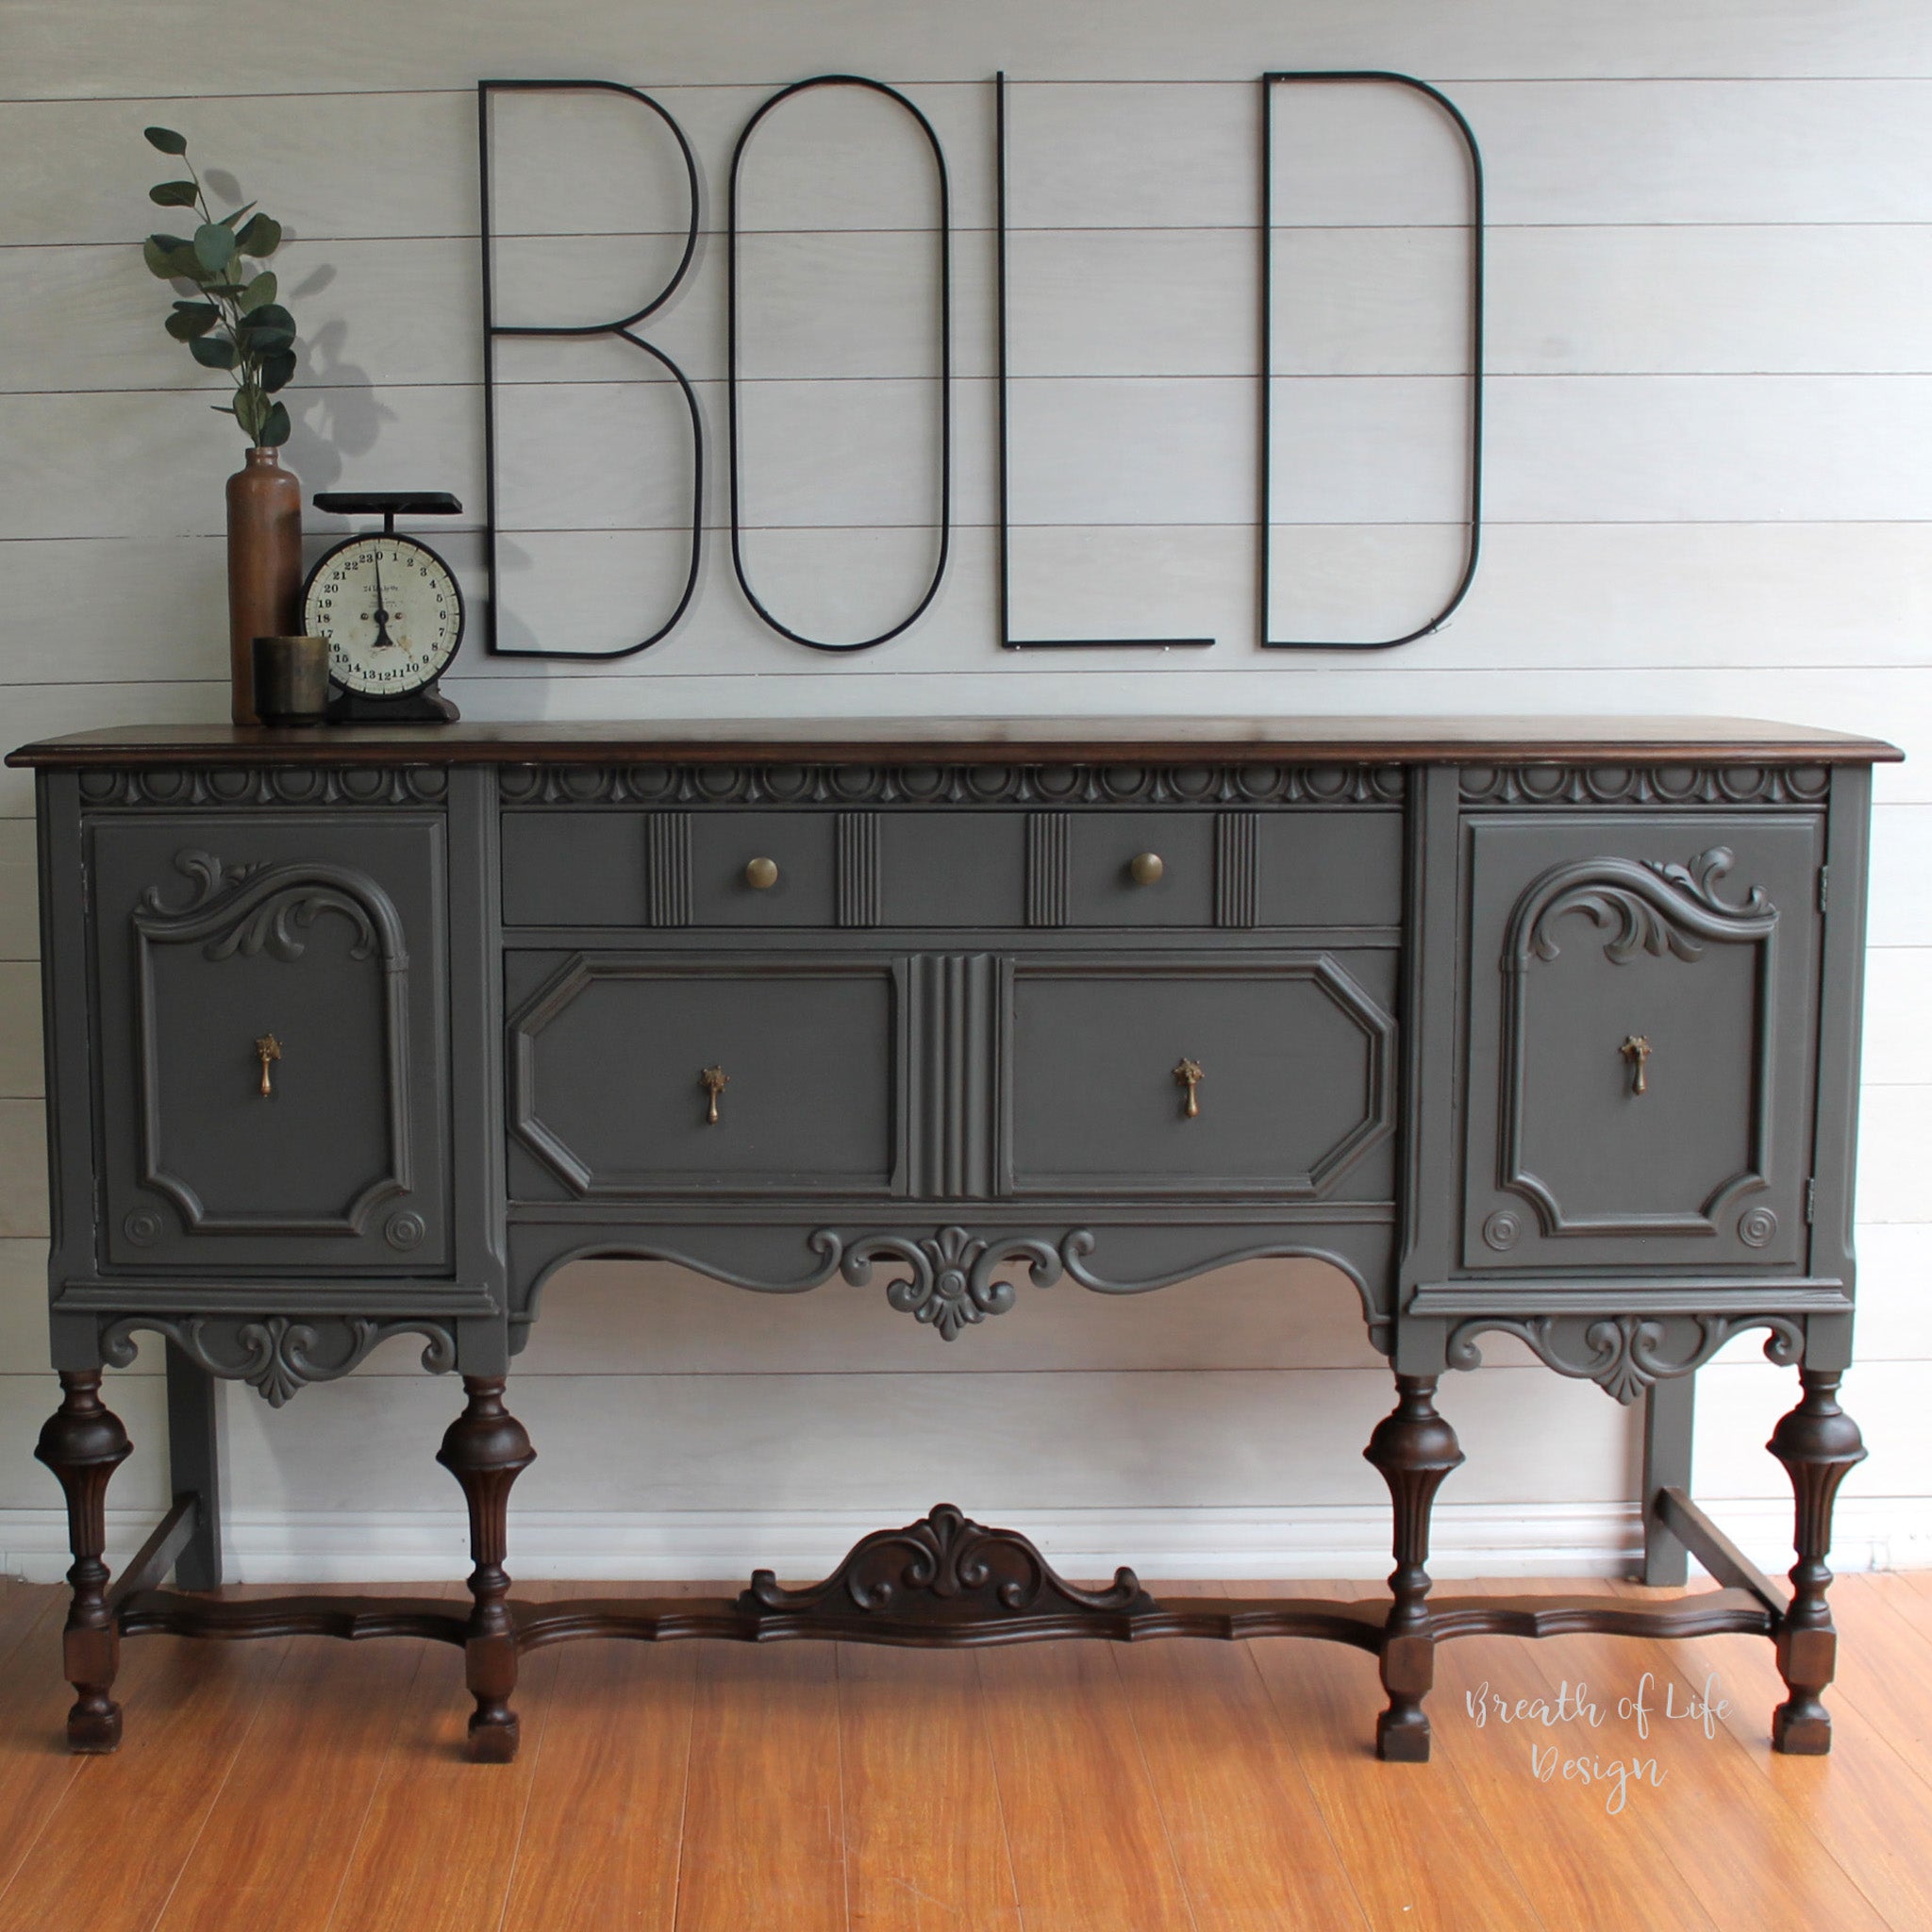 A vintage console table refurbished by Breath of Life Design is painted in Dixie Belle's Gravel Road chalk mineral paint.